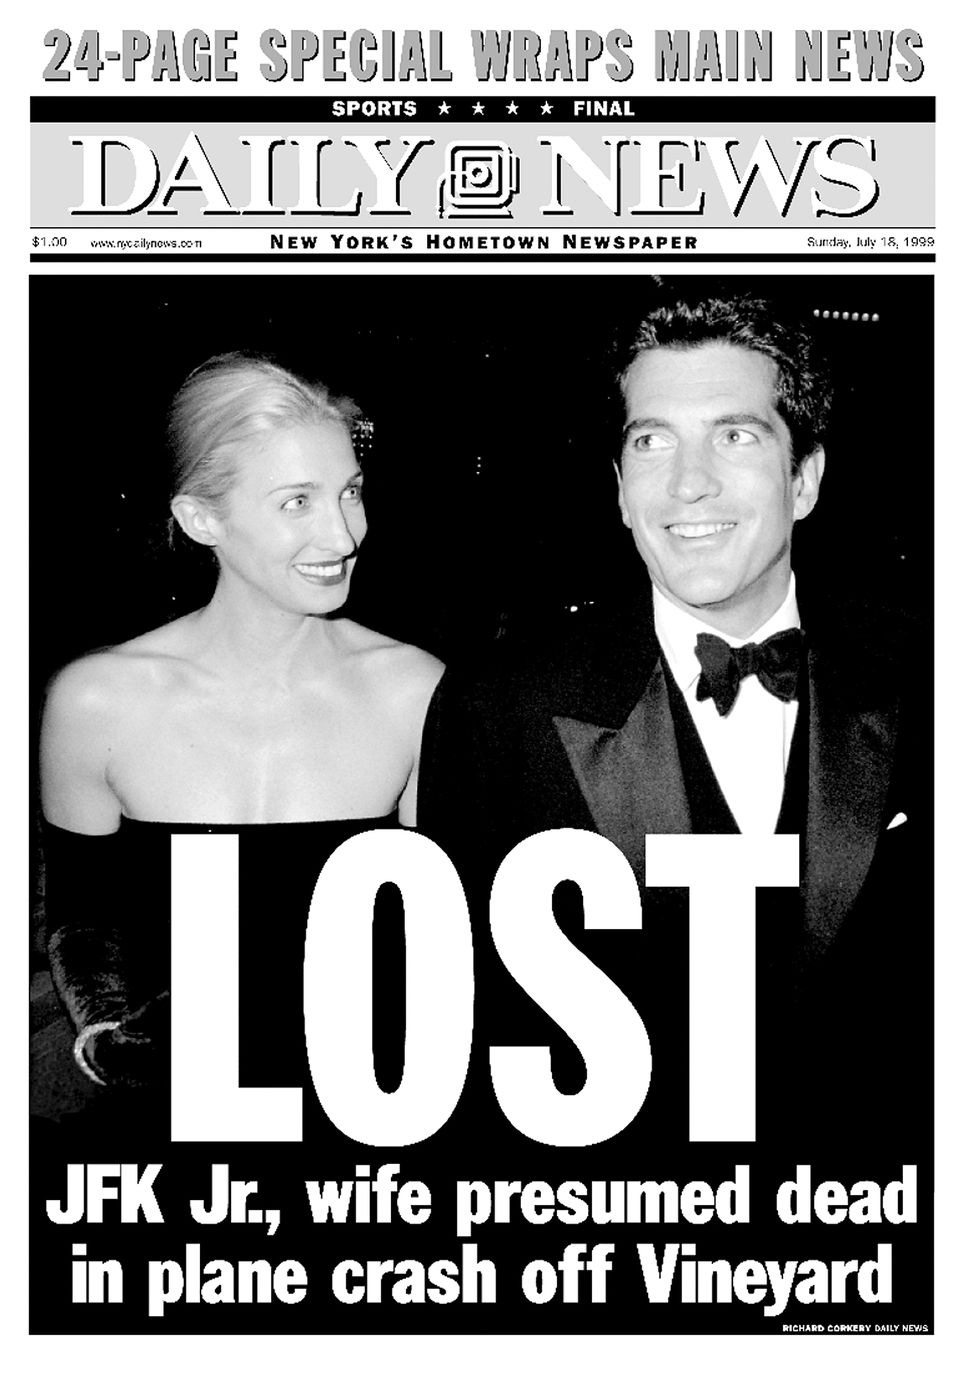 The cover of the 'New York Daily News' featuring John F. Kennedy Jr. and Carolyn Bessette after their plane crashed on July 16, 1999